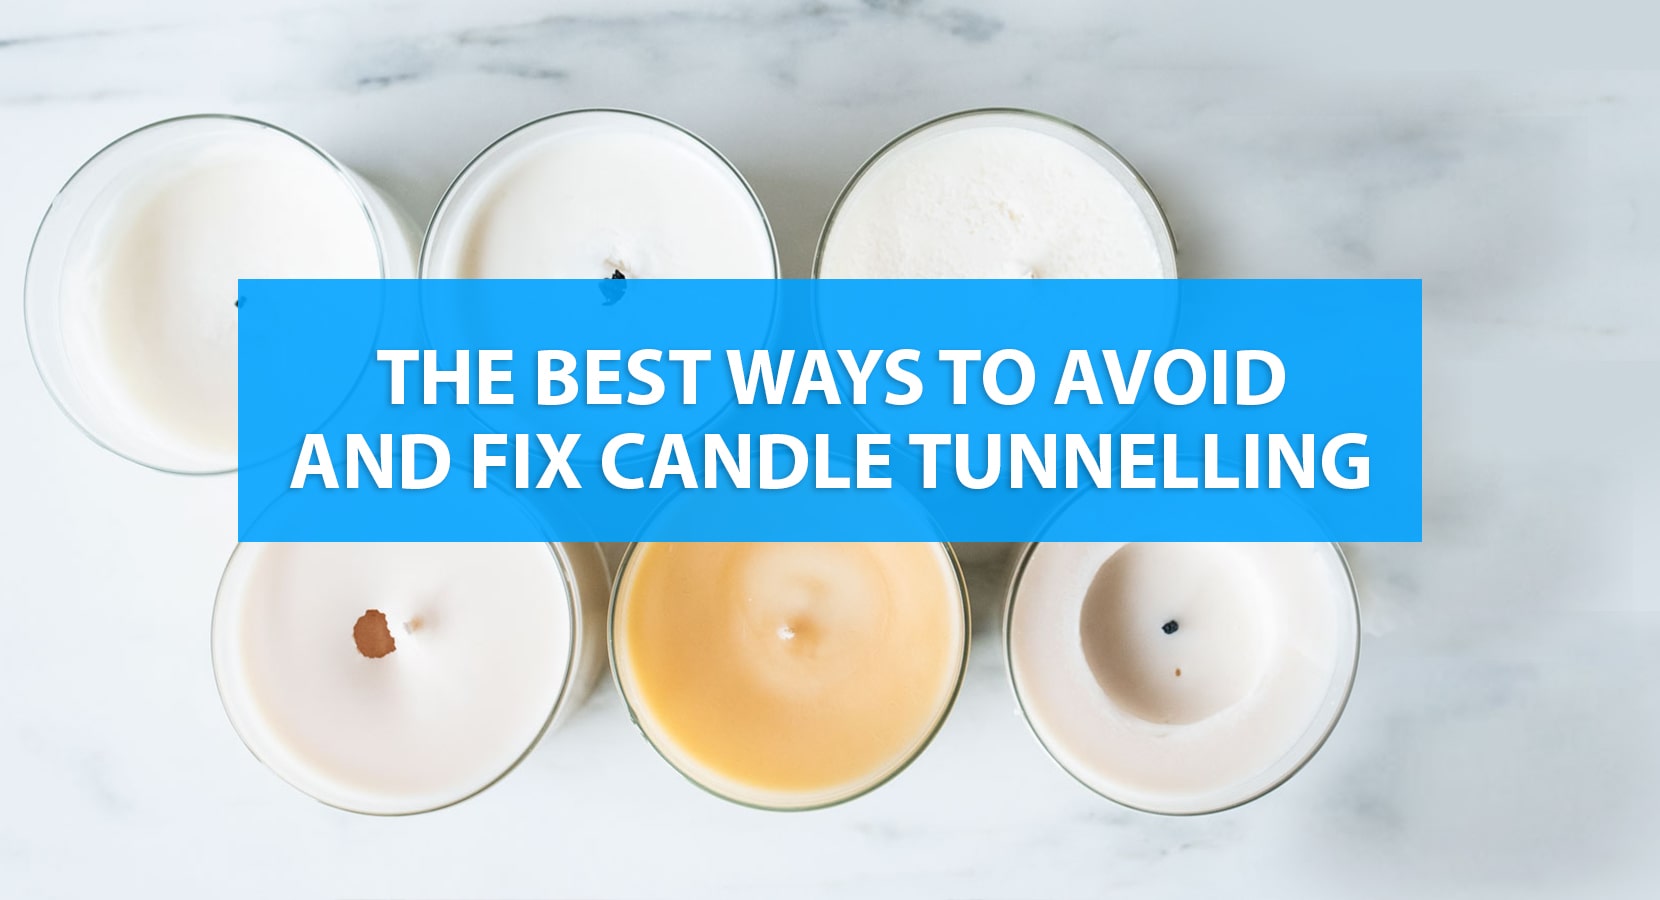 TIPS ABOUT CANDLE TUNNELING